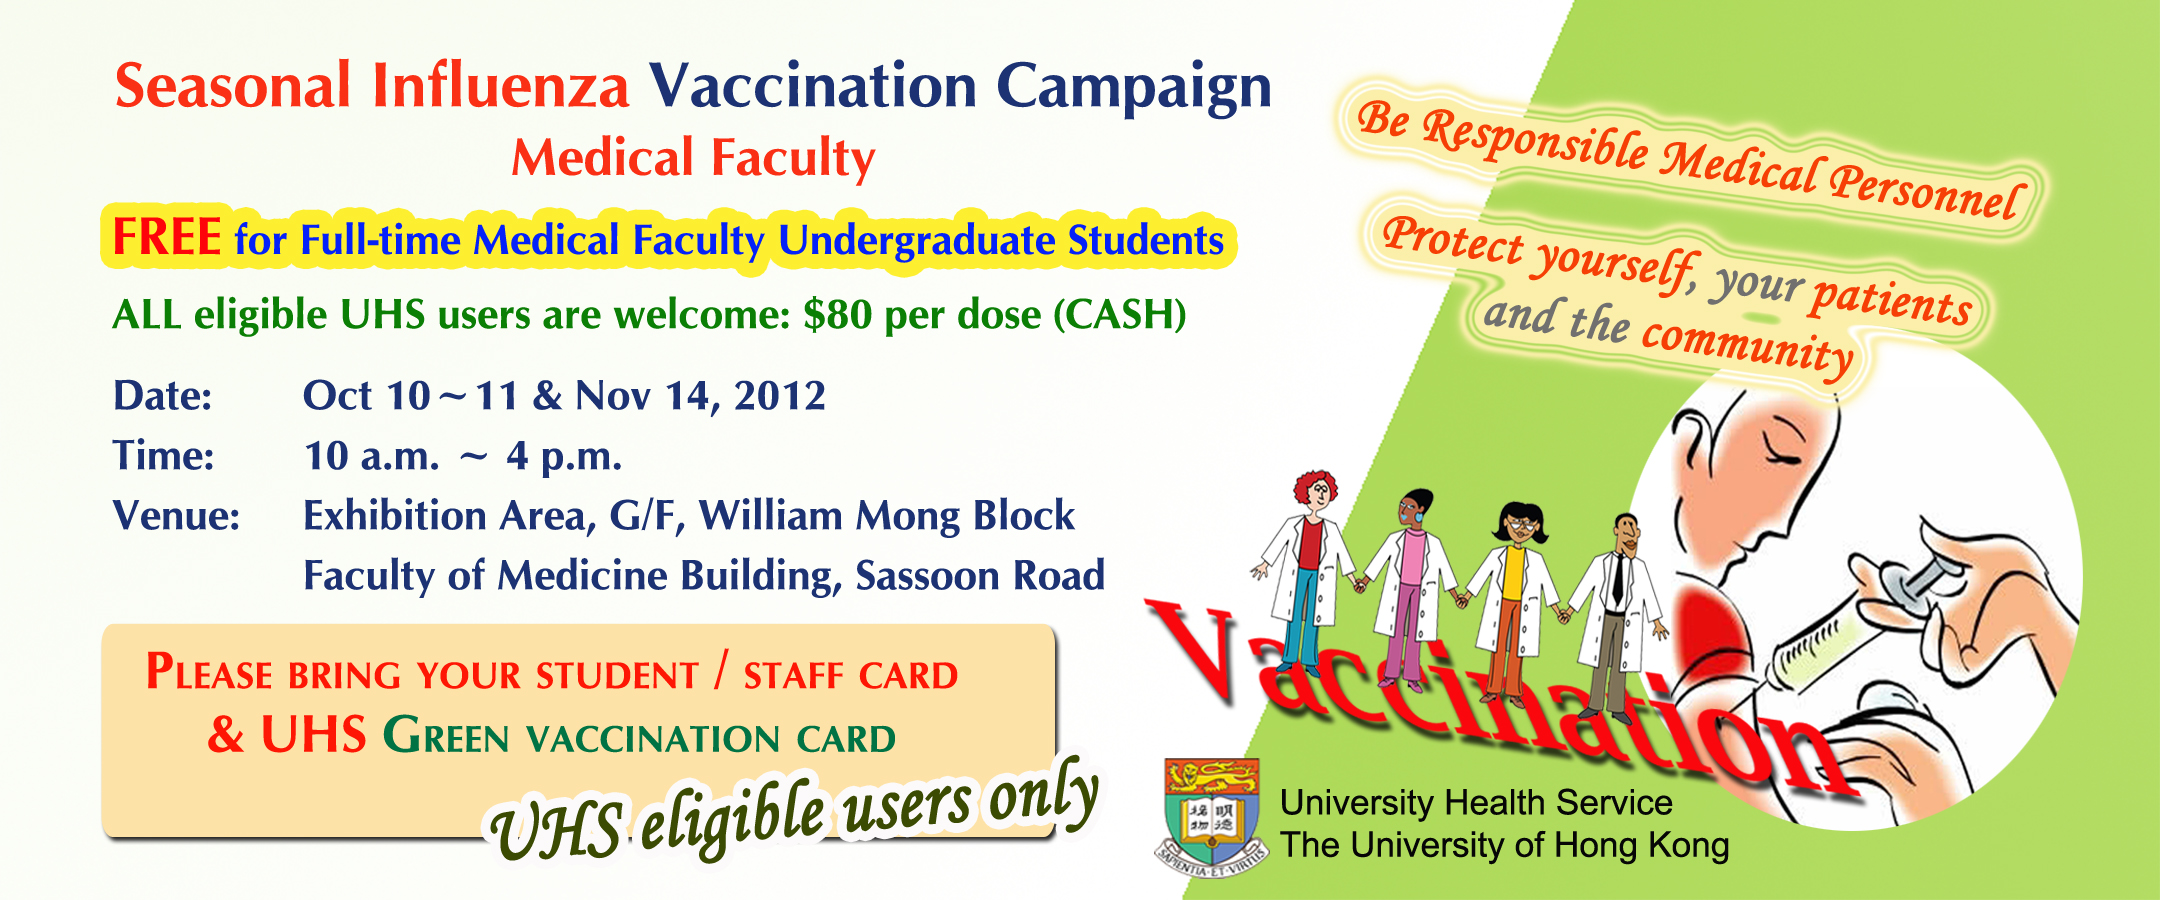 Seasonal Influenza Vaccination Campaign (Medical Faculty)